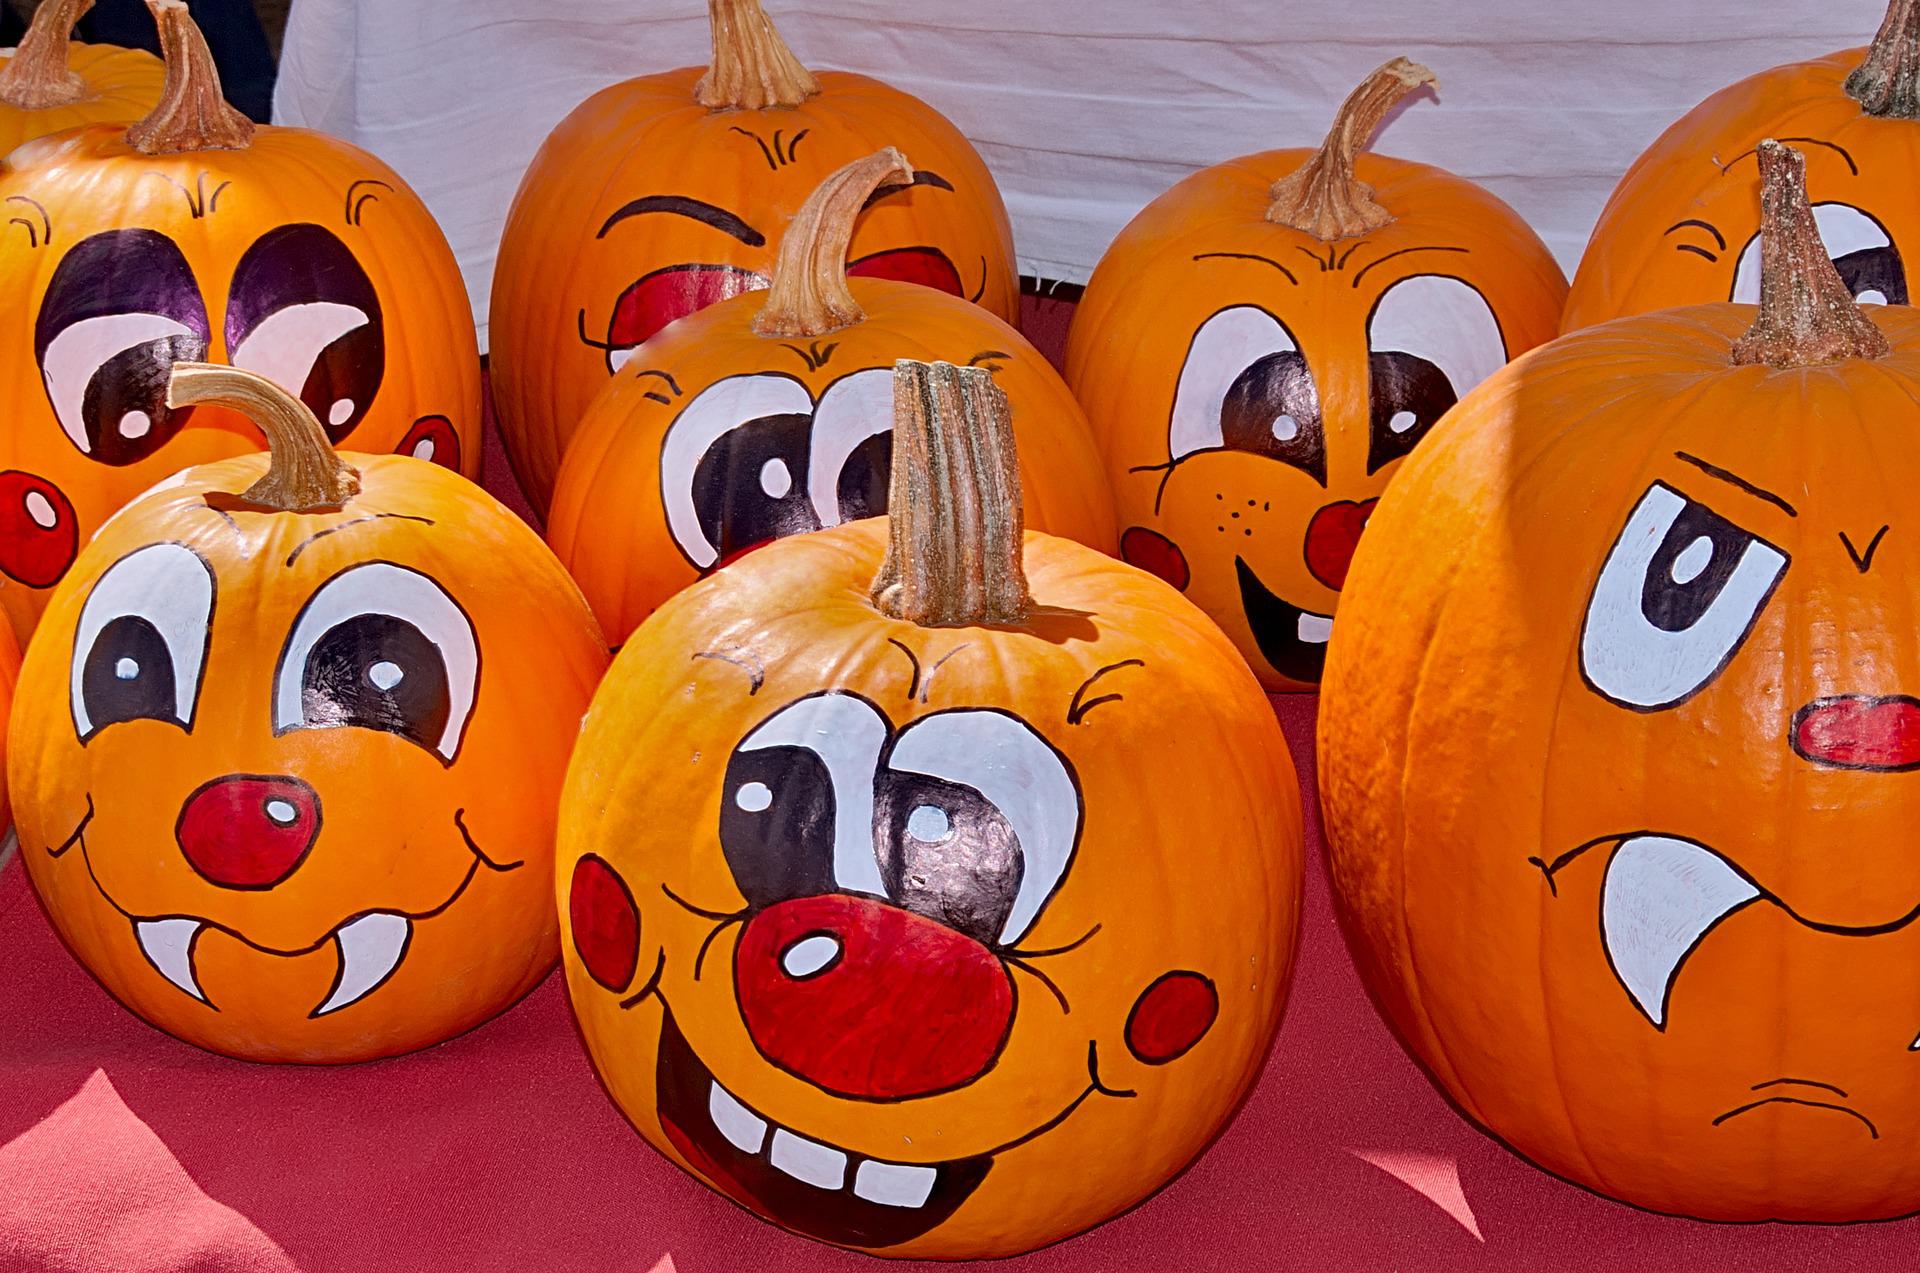 Pumpkins with silly painted faces.